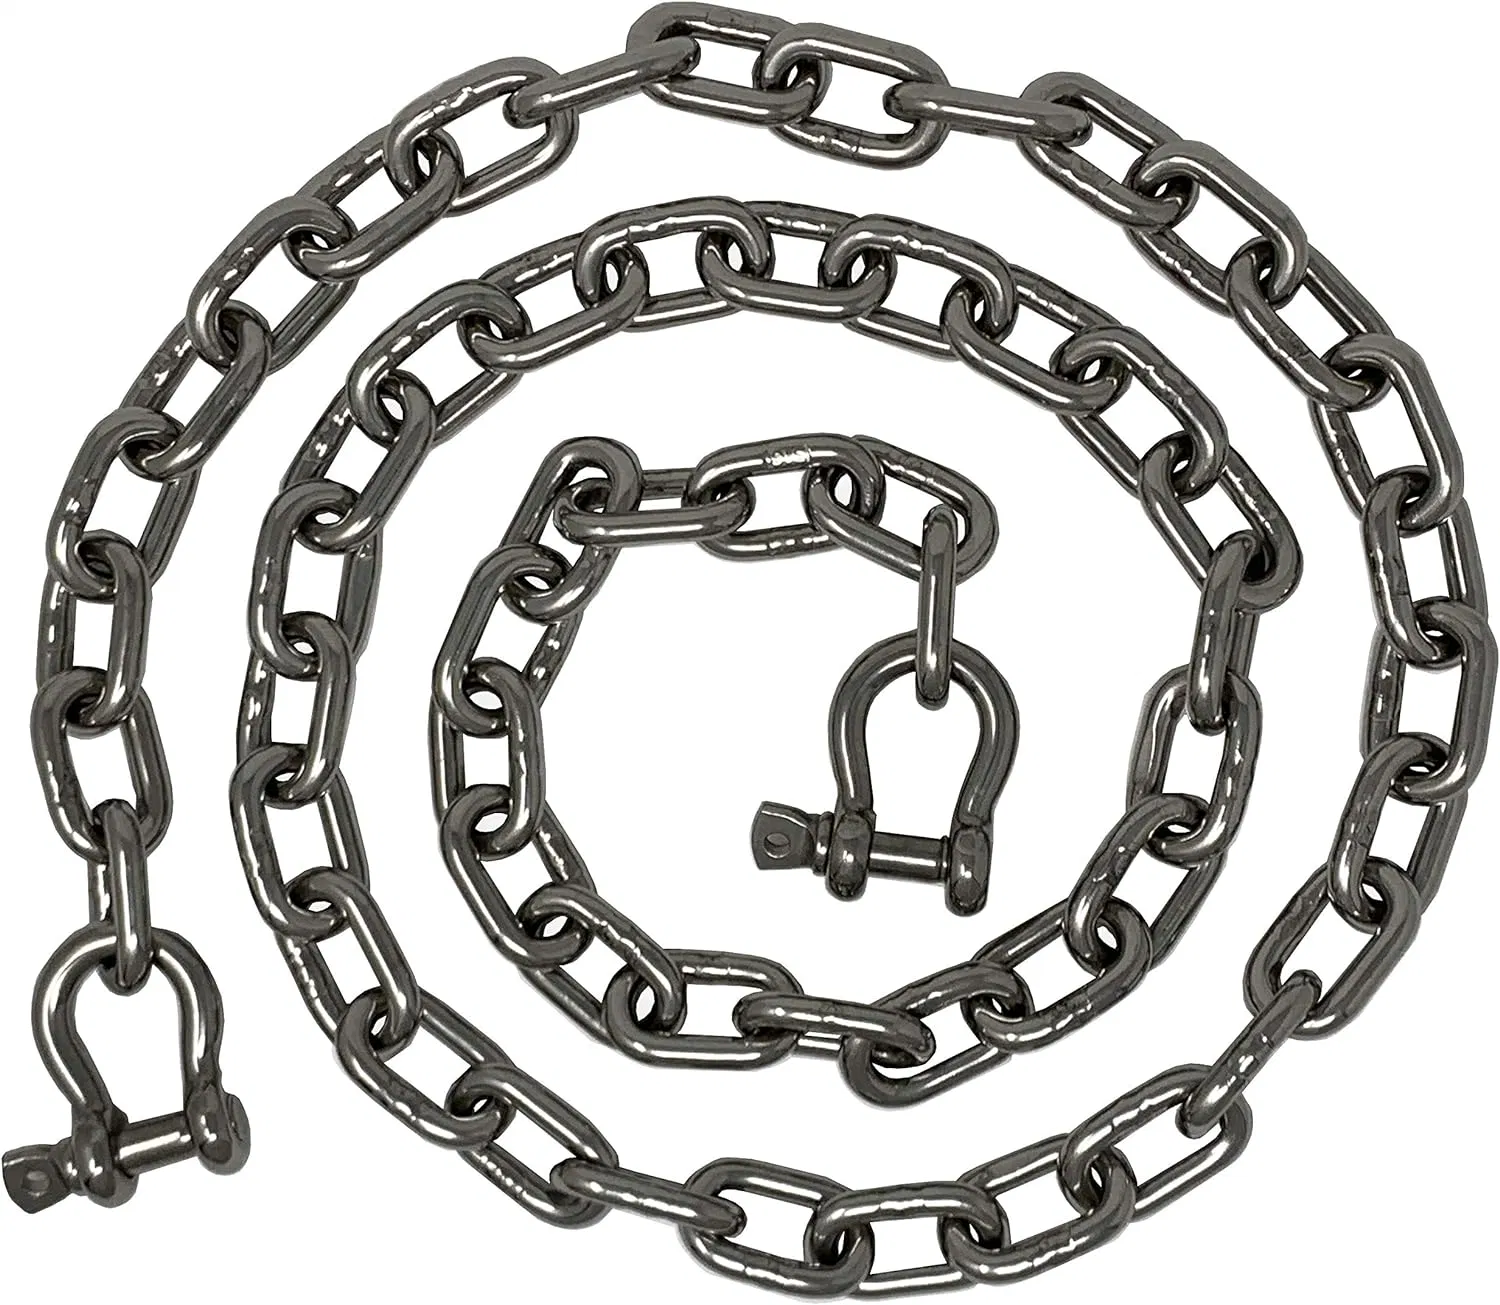 Anchor Chain - 1/4" X 4' Stainless Steel Boat Chain - Premium Marine Grade 316ss Boat Anchor Chain with Oversized Shackles G40